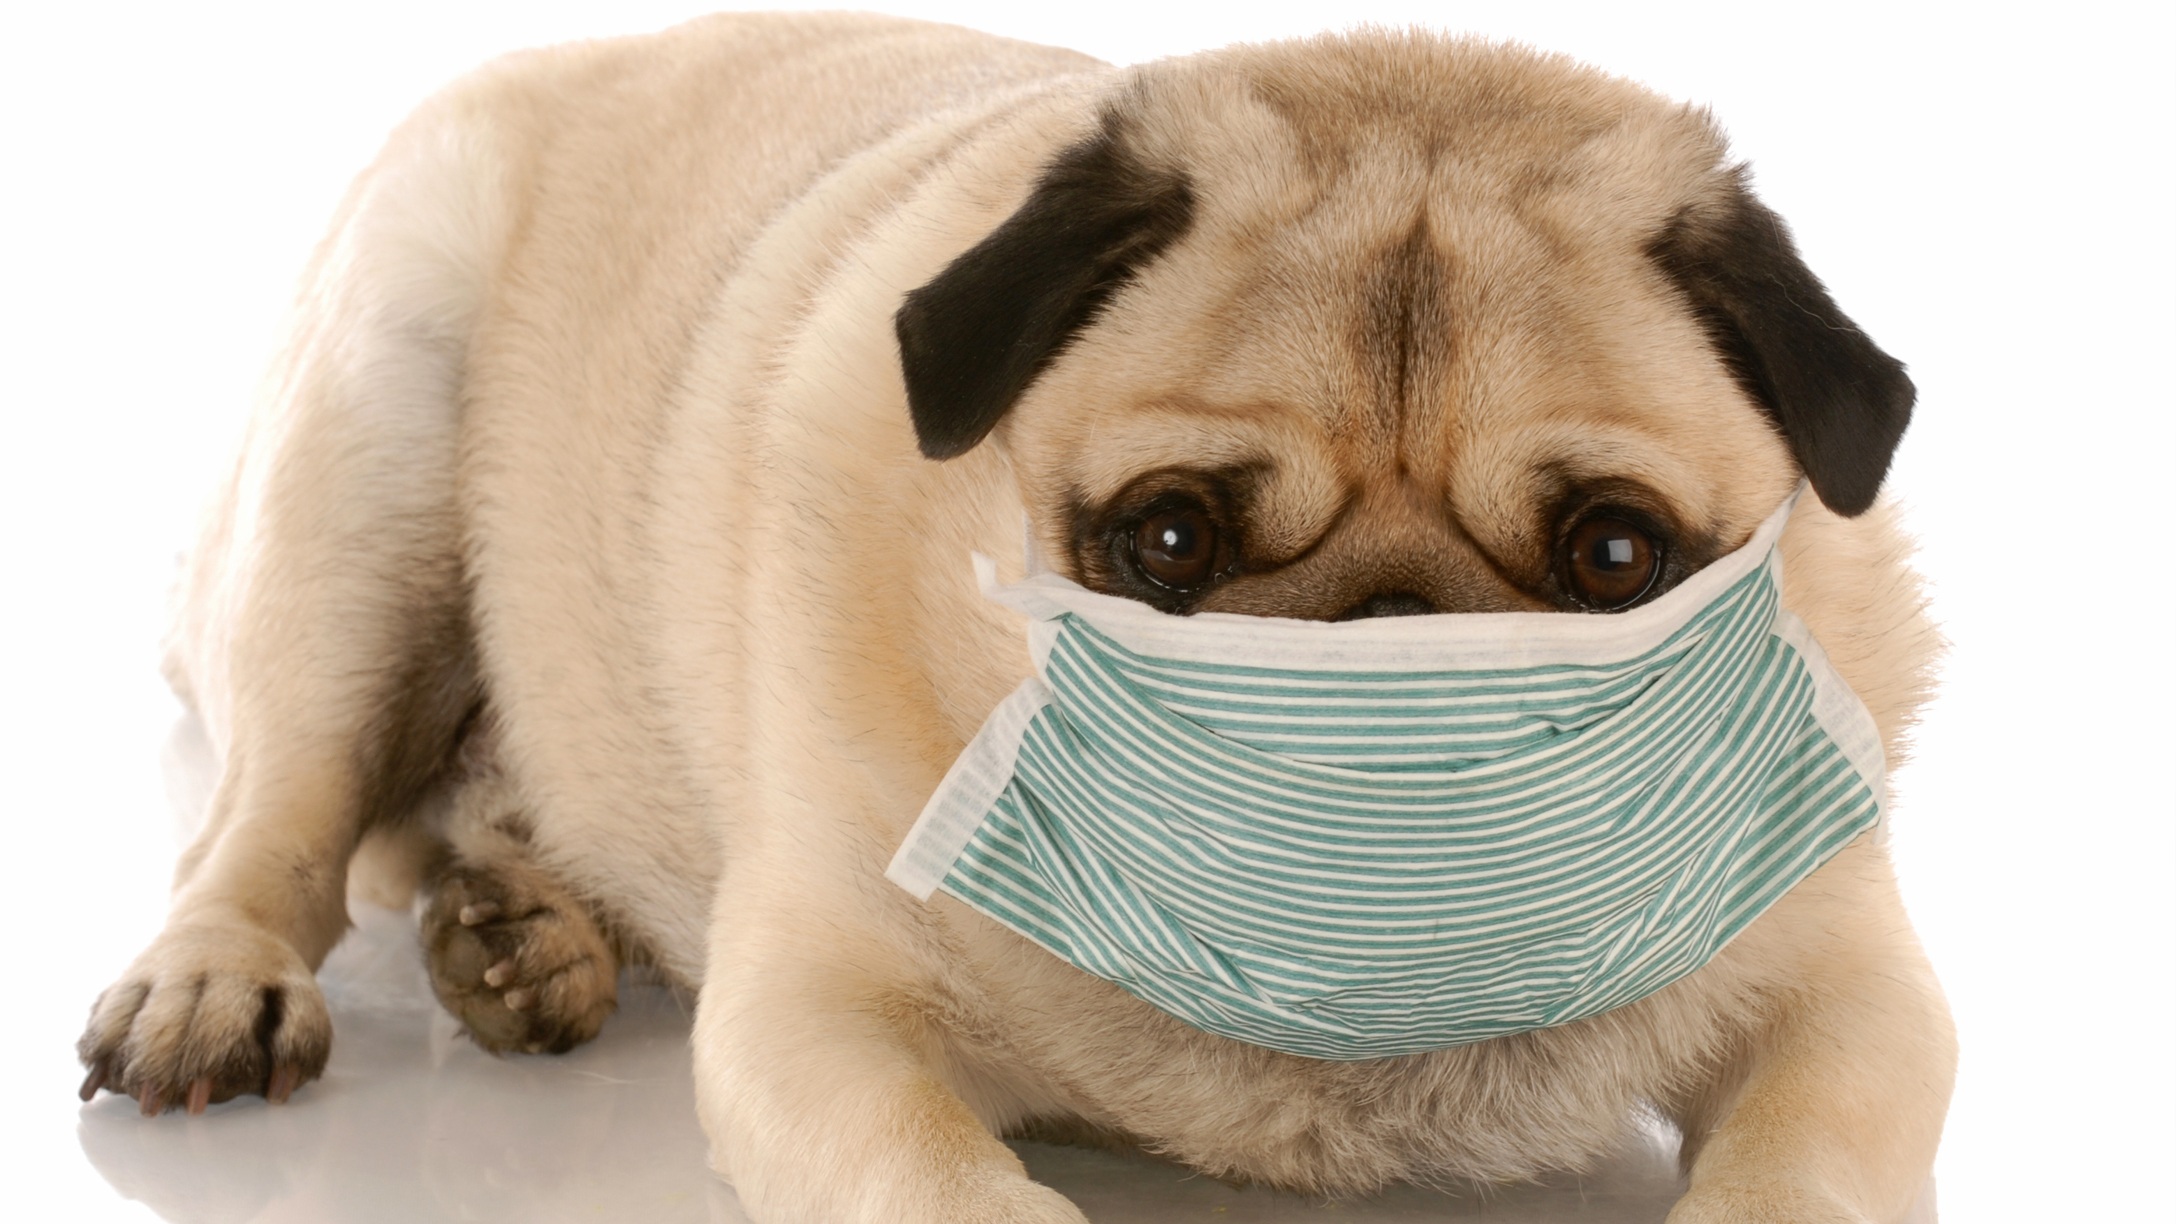  Coronavirus in Dogs – Everything You Need to Know